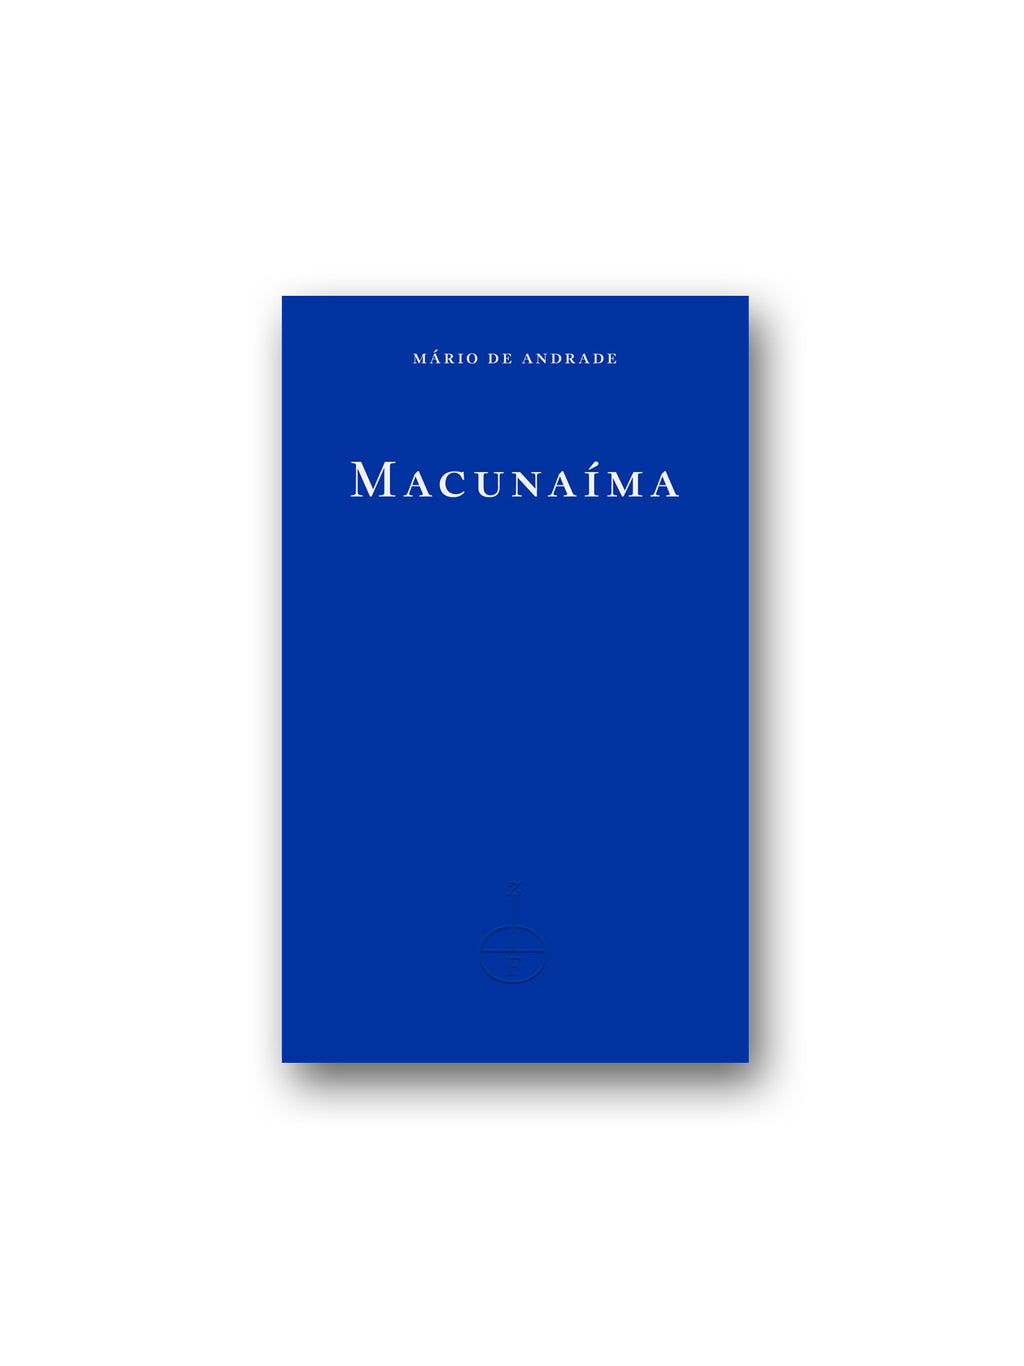 Macunaíma: The Hero with No Character